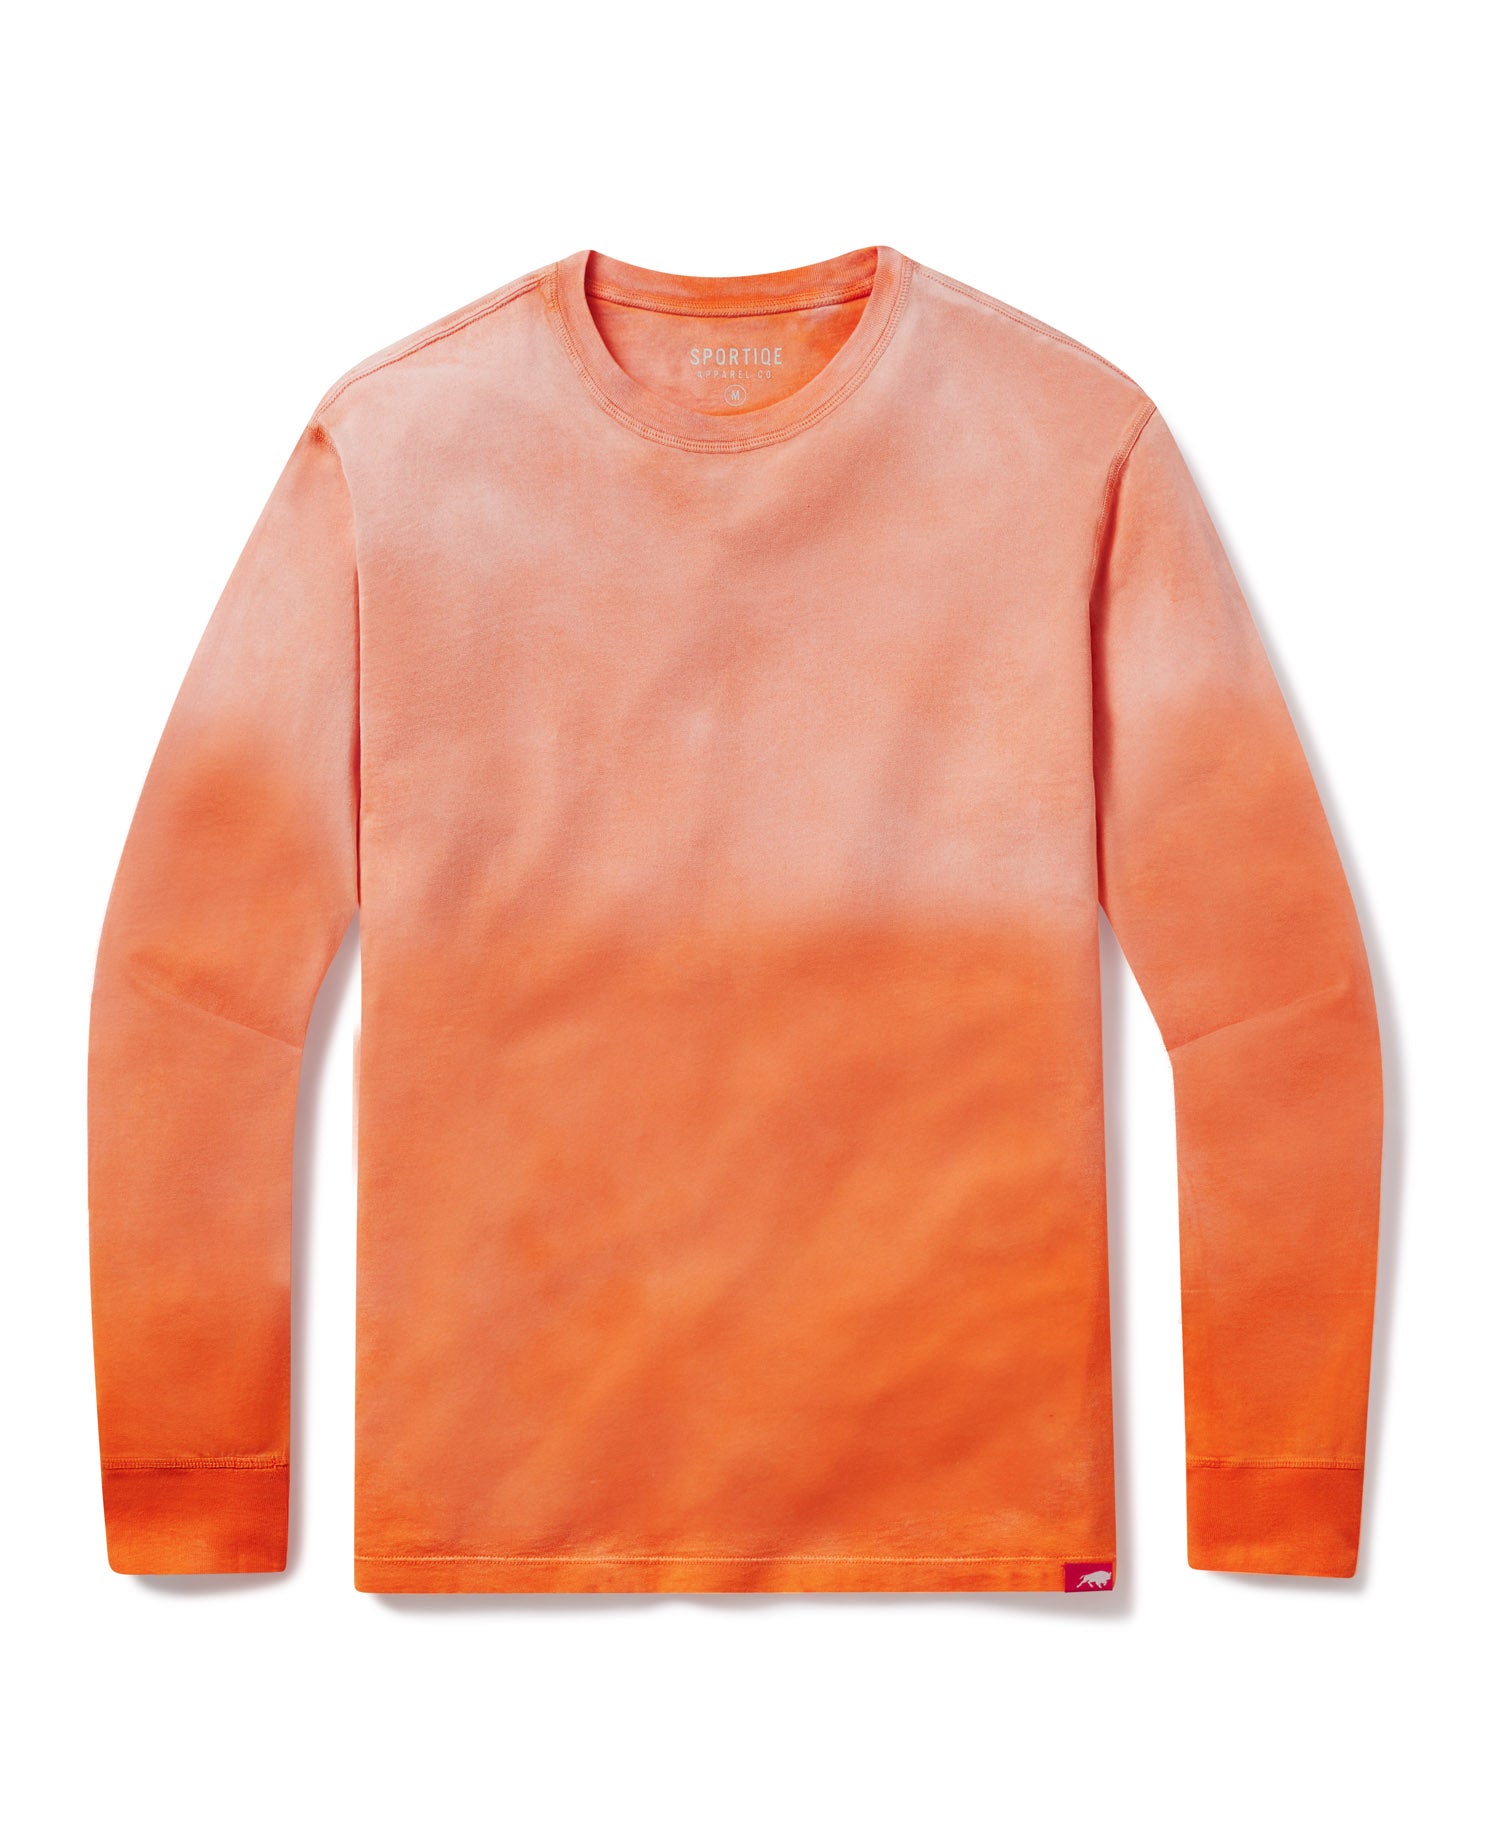 MEN'S SUN-DIPPED MOHAVE LONG SLEEVE TEE - Sportiqe Apparel 